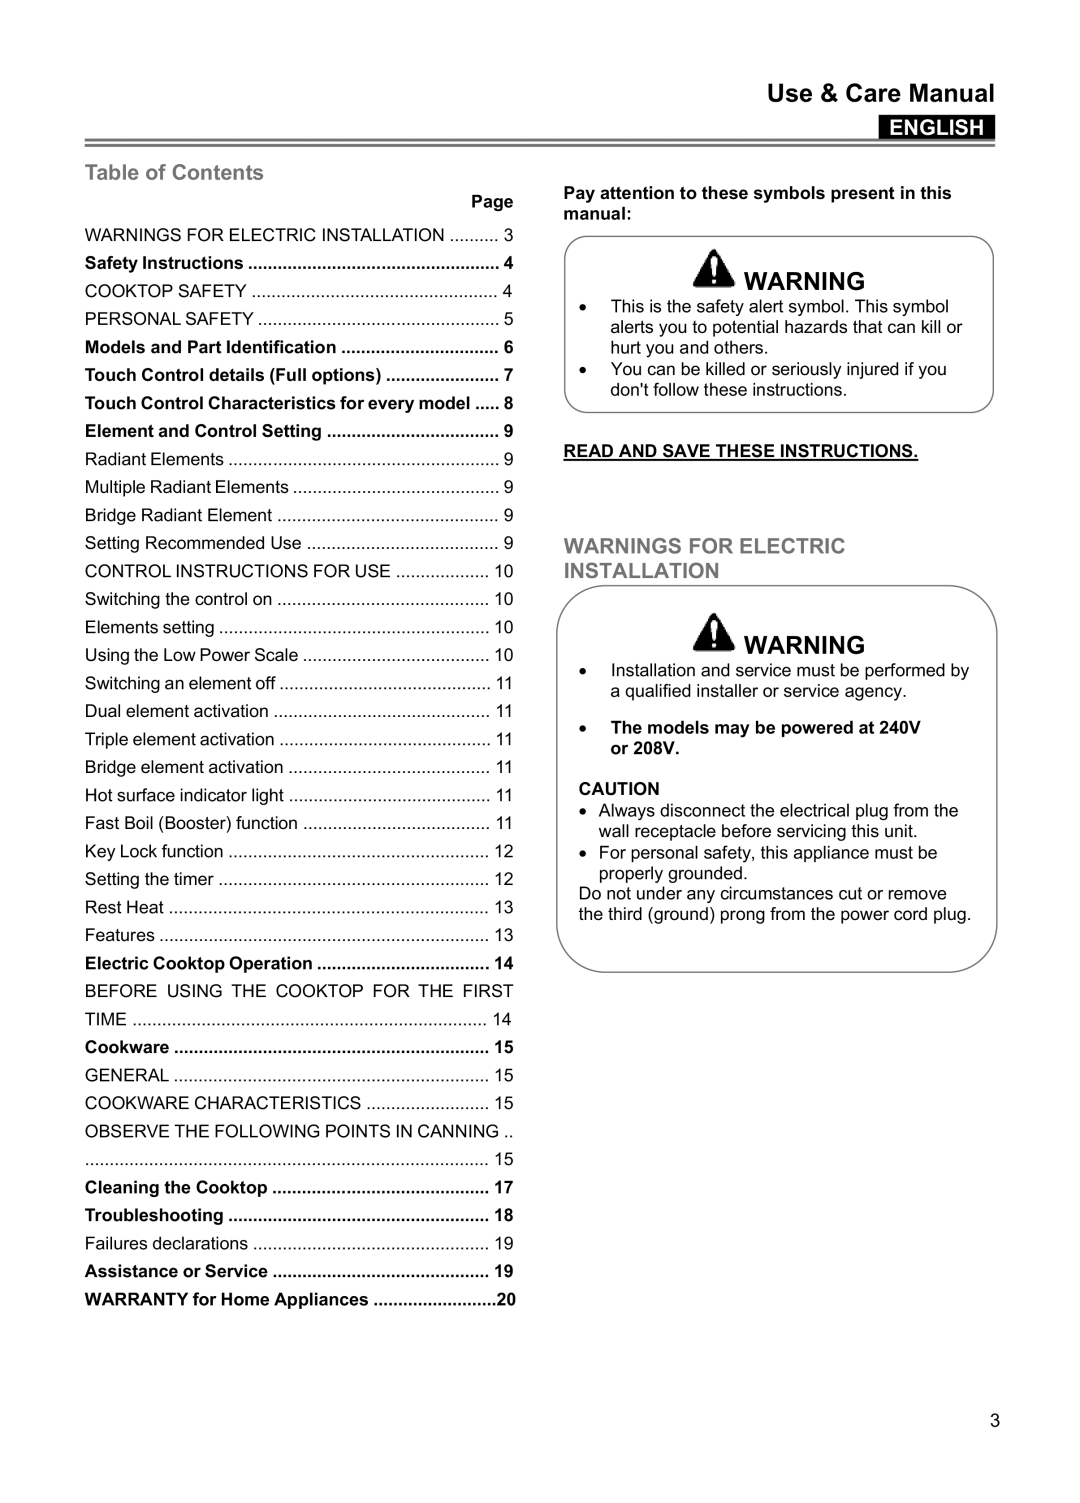 Blomberg CTE 30400, CTE 36500 Use & Care Manual, English, Table of Contents, Warnings For Electric Installation 